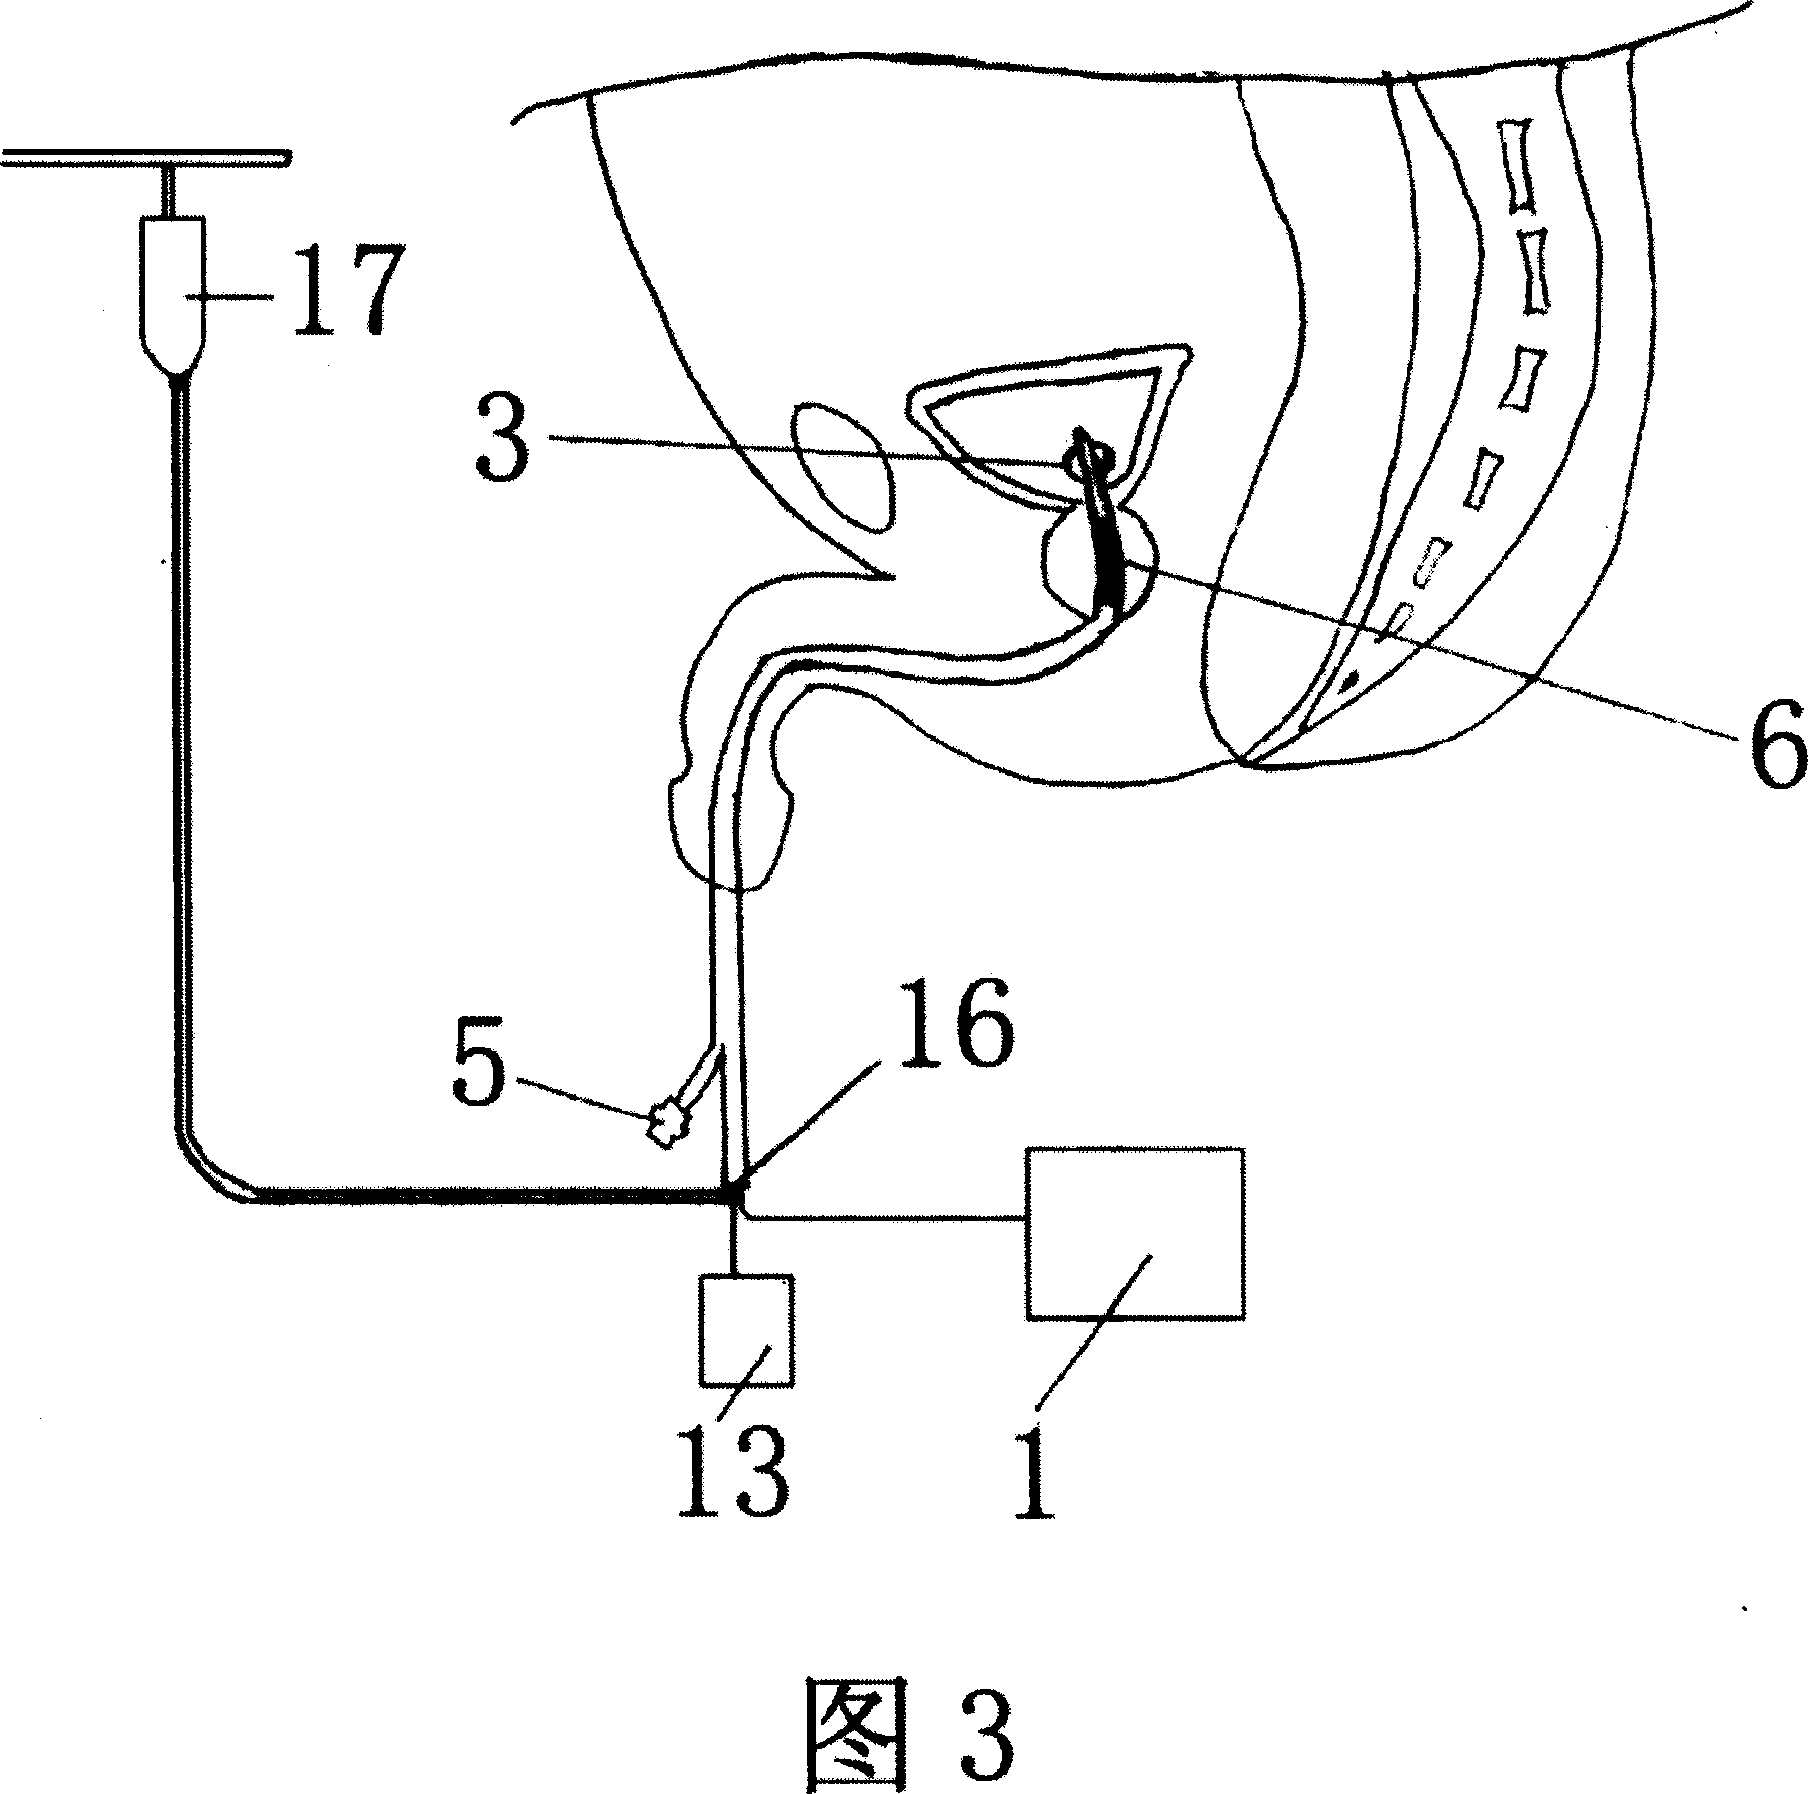 Apparatus for treating prostate diseases, and its making method